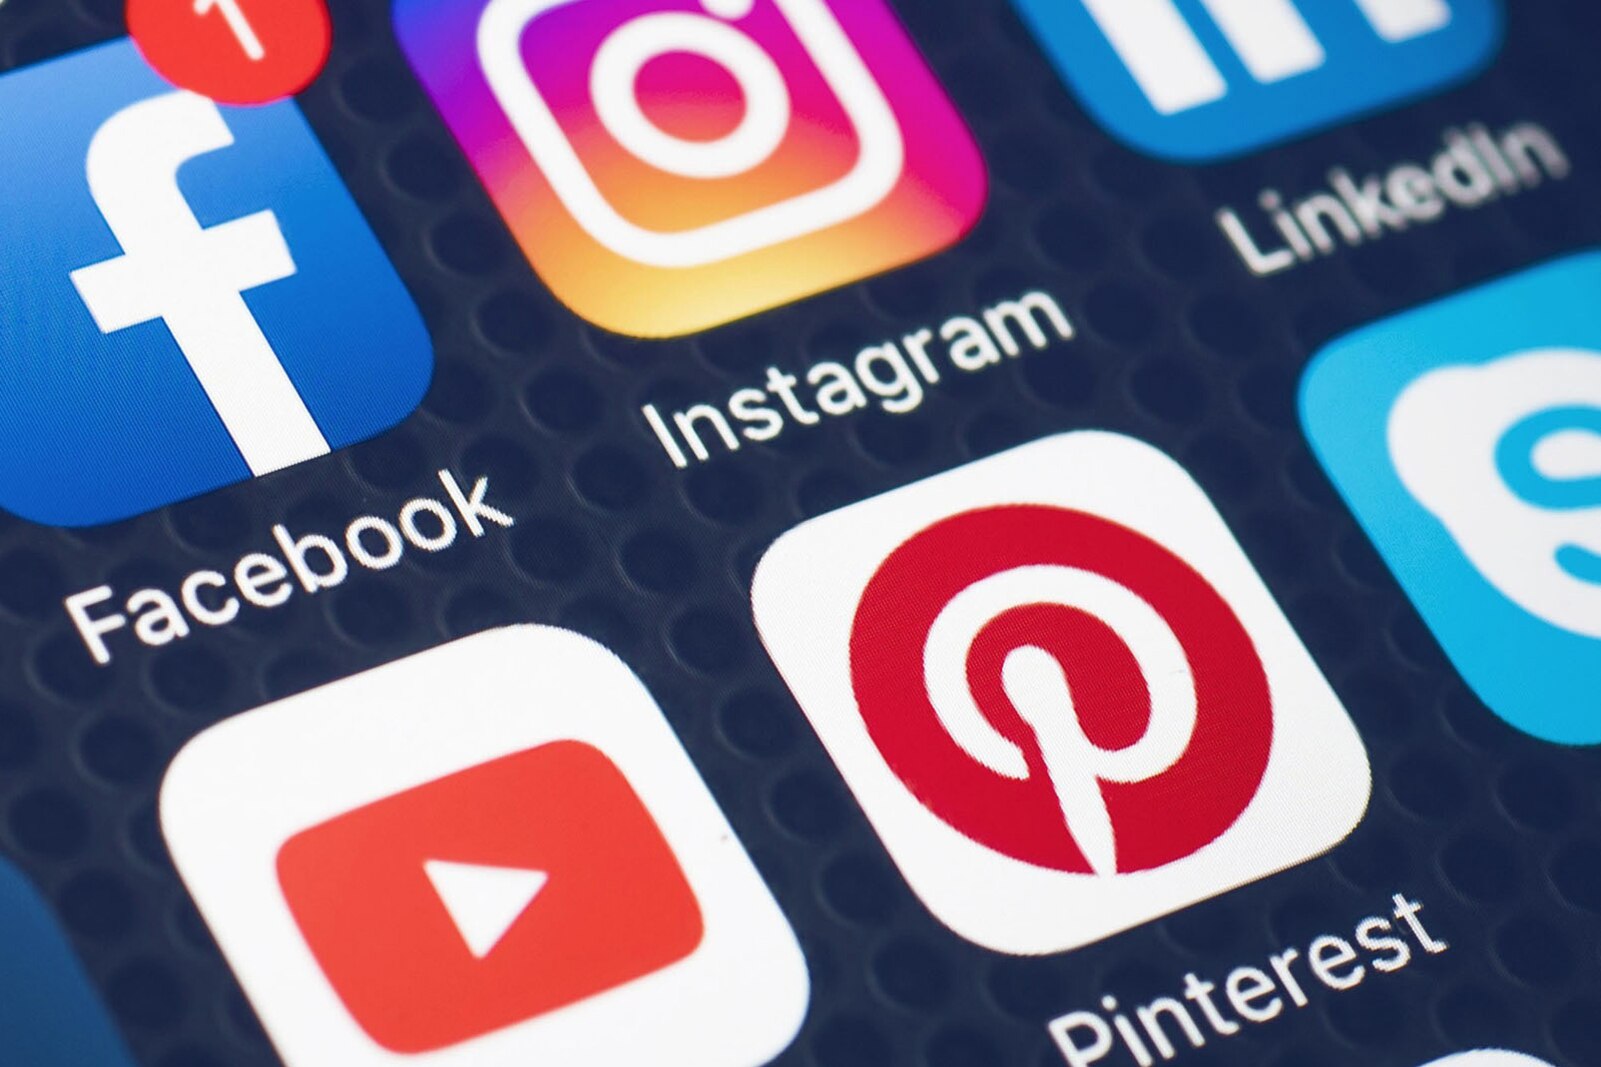 It is important for military personnel to remember that when they’re logged on to a social media platform, they still represent their respective branch of service and must abide by the Uniform Code of Military Justice at all times, even when off-duty.